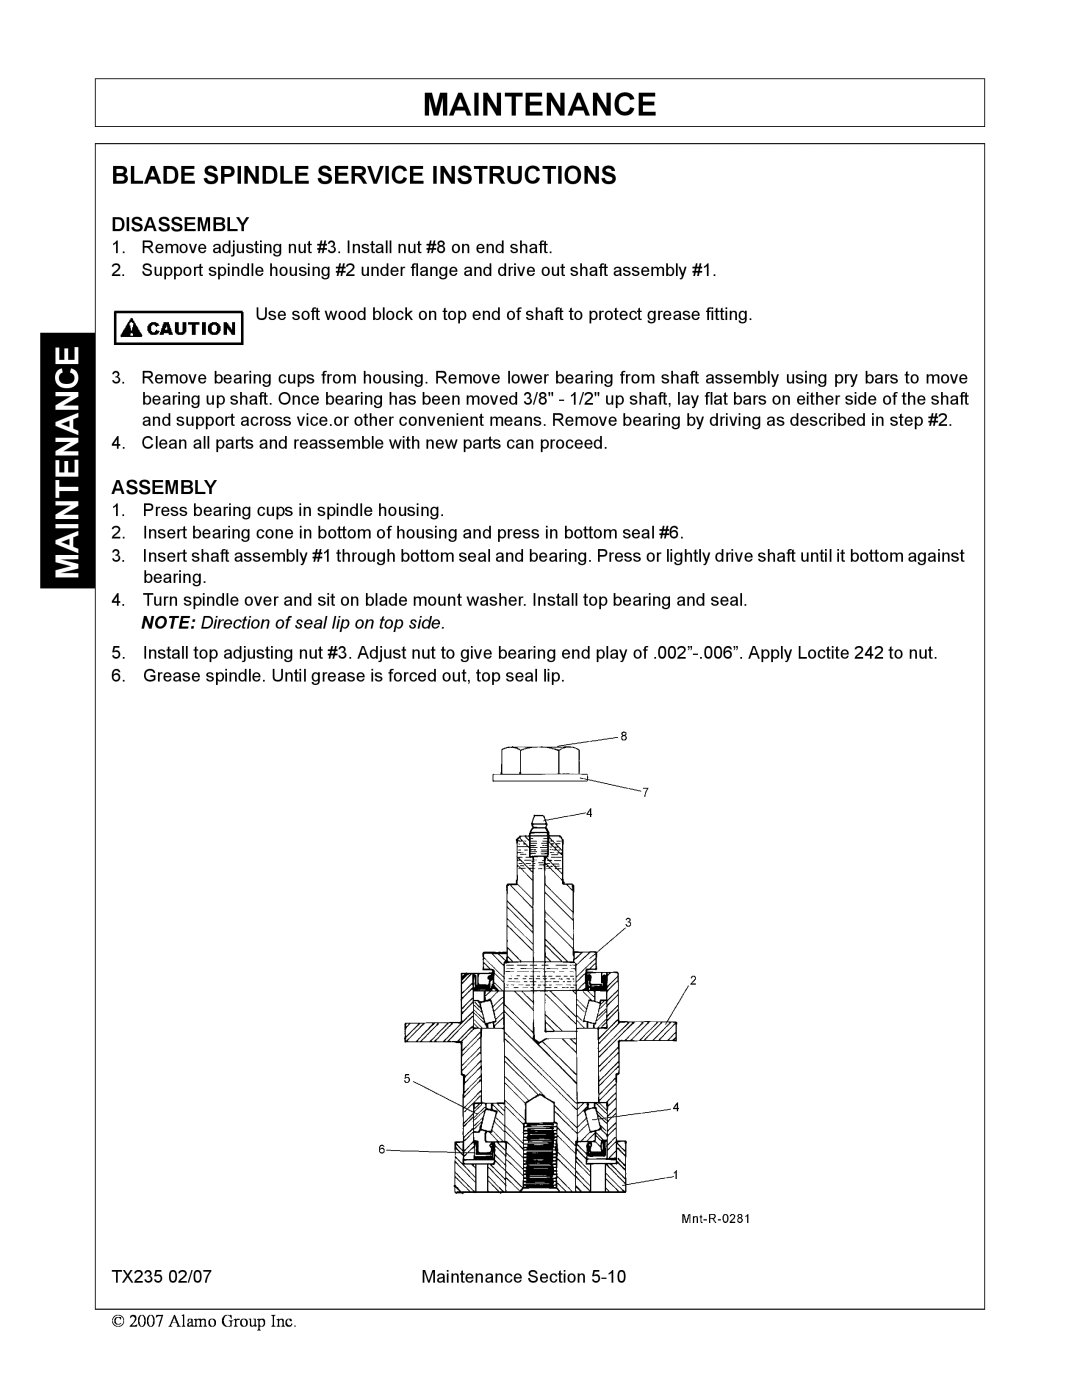 Alamo TX235 Blade Spindle Service Instructions, Maintenance, Disassembly, Assembly, NOTE Direction of seal lip on top side 